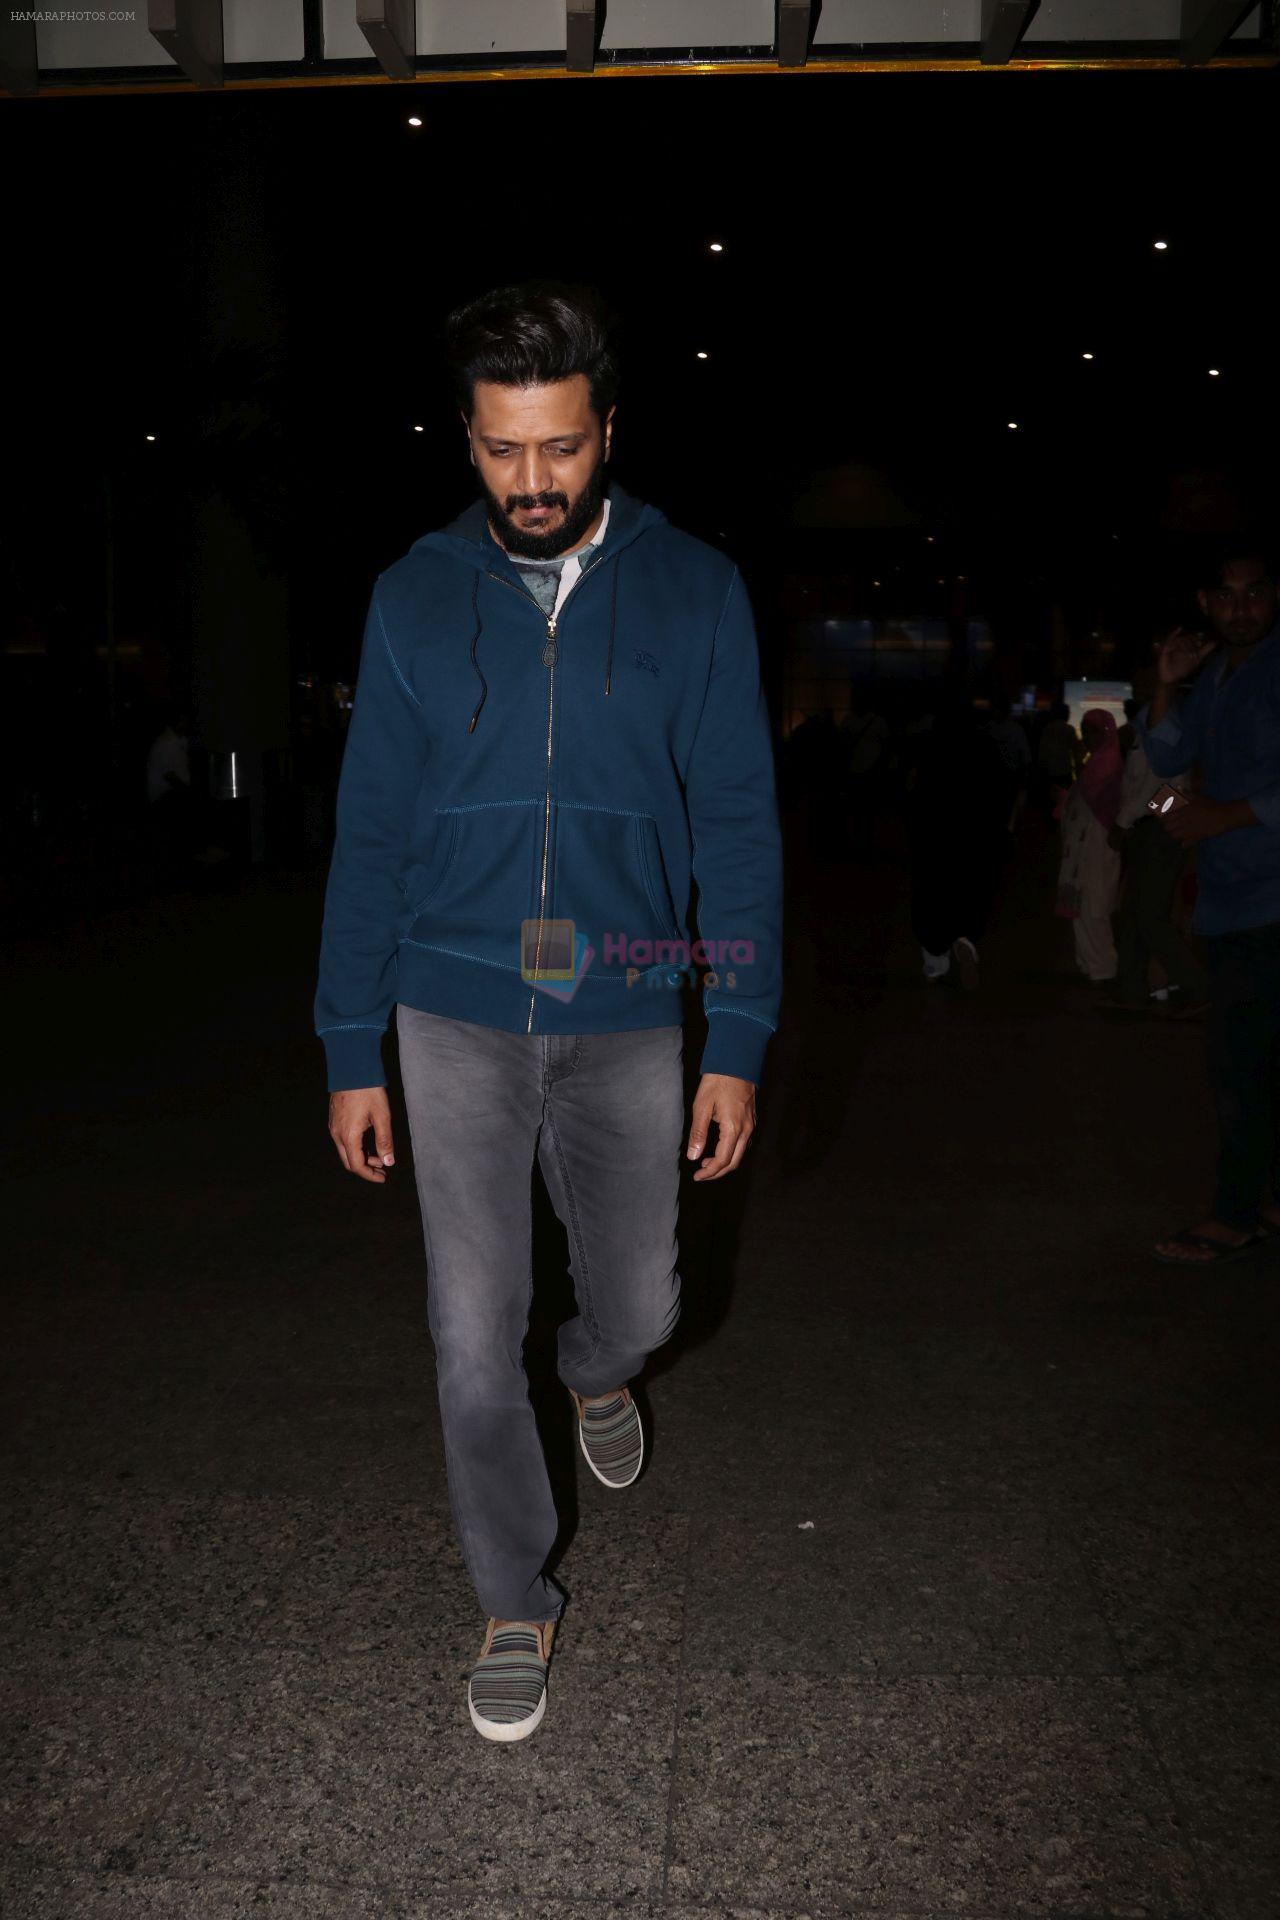 Riteish Deshmukh Spotted At Airport on 24th June 2017